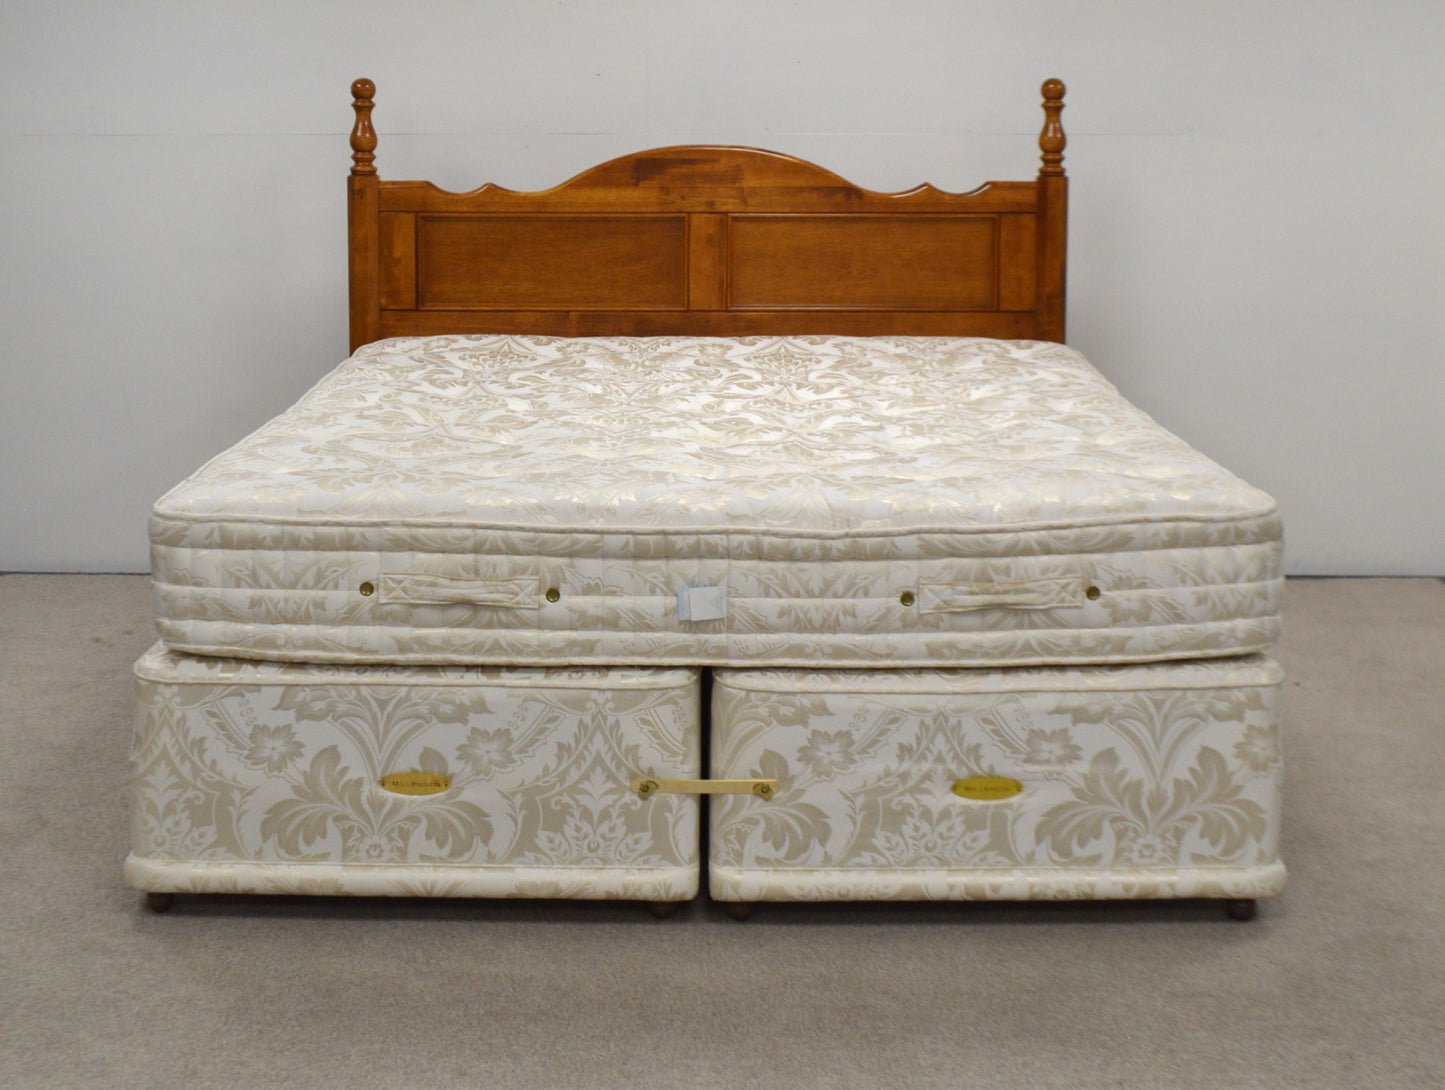 Millbrook King Size Bed and Matching Mattress with Willis & Gambier headboard